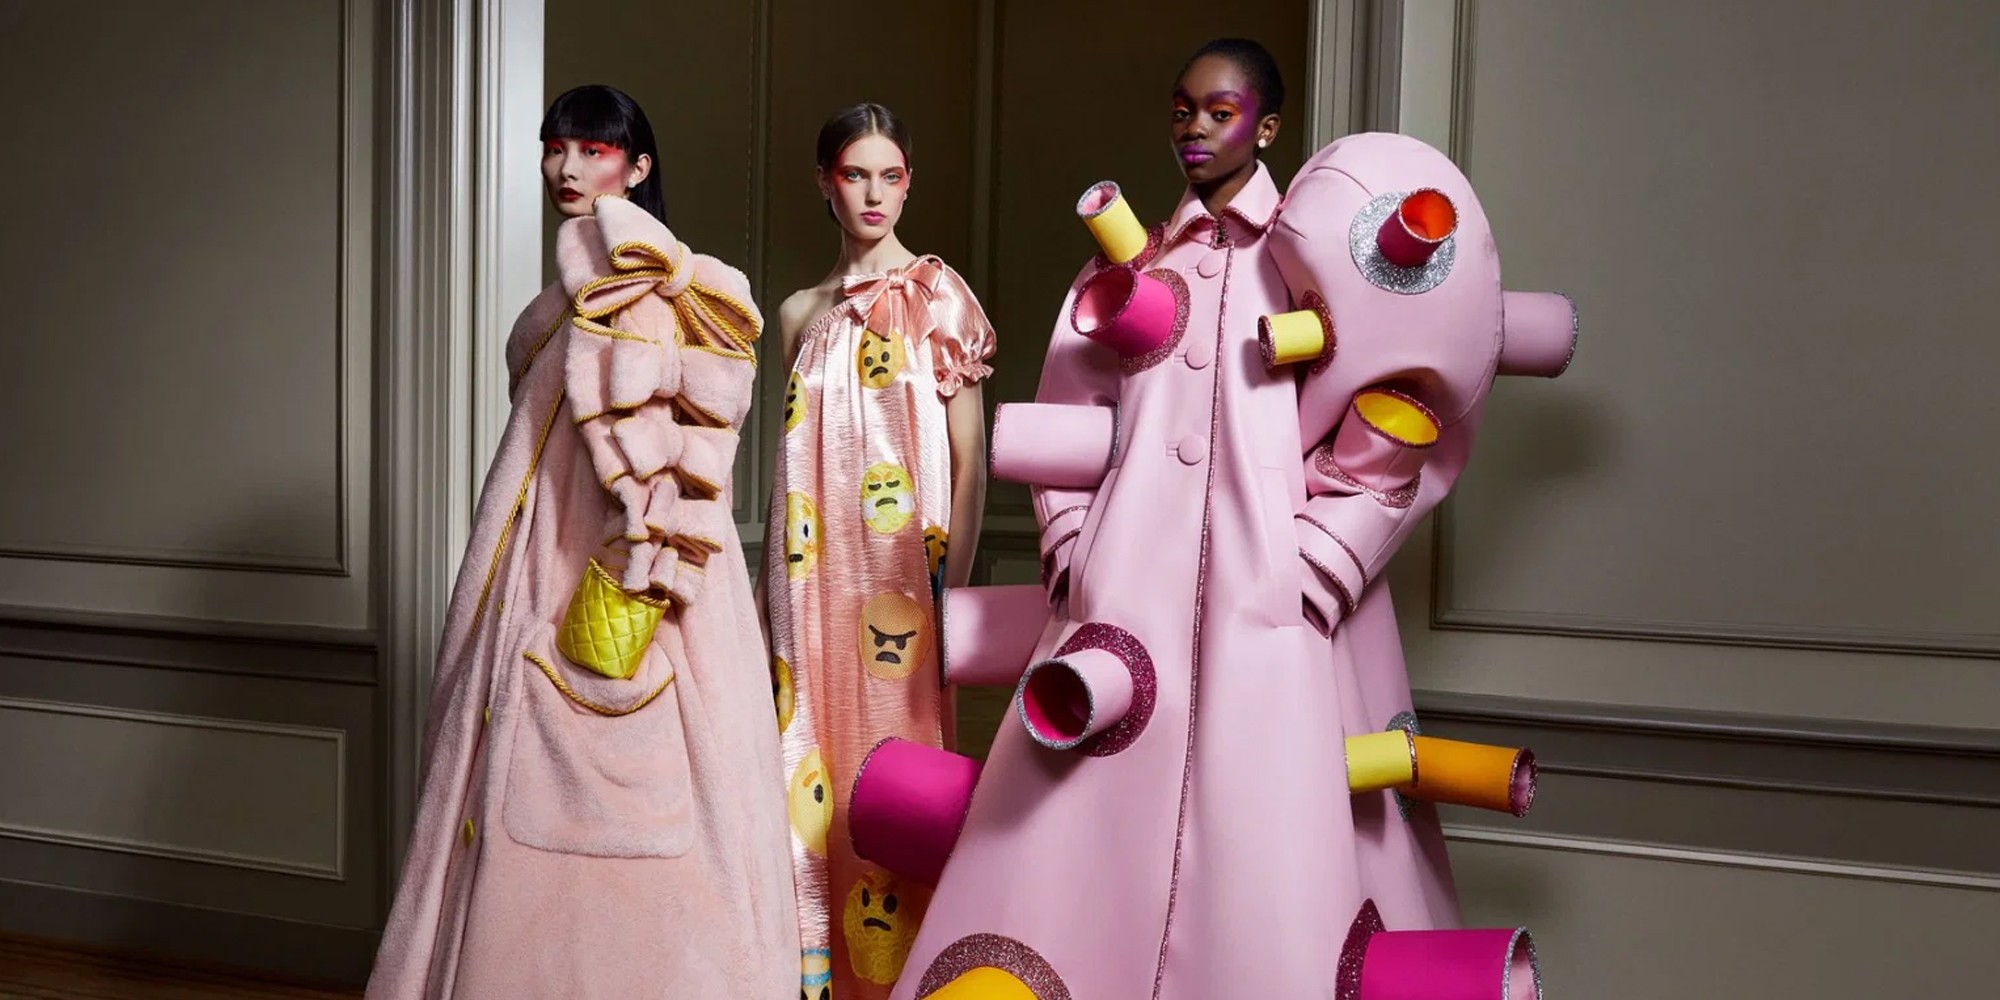 VIKTOR & ROLF FALL 2020 HAUTE COUTURE COLLECTION